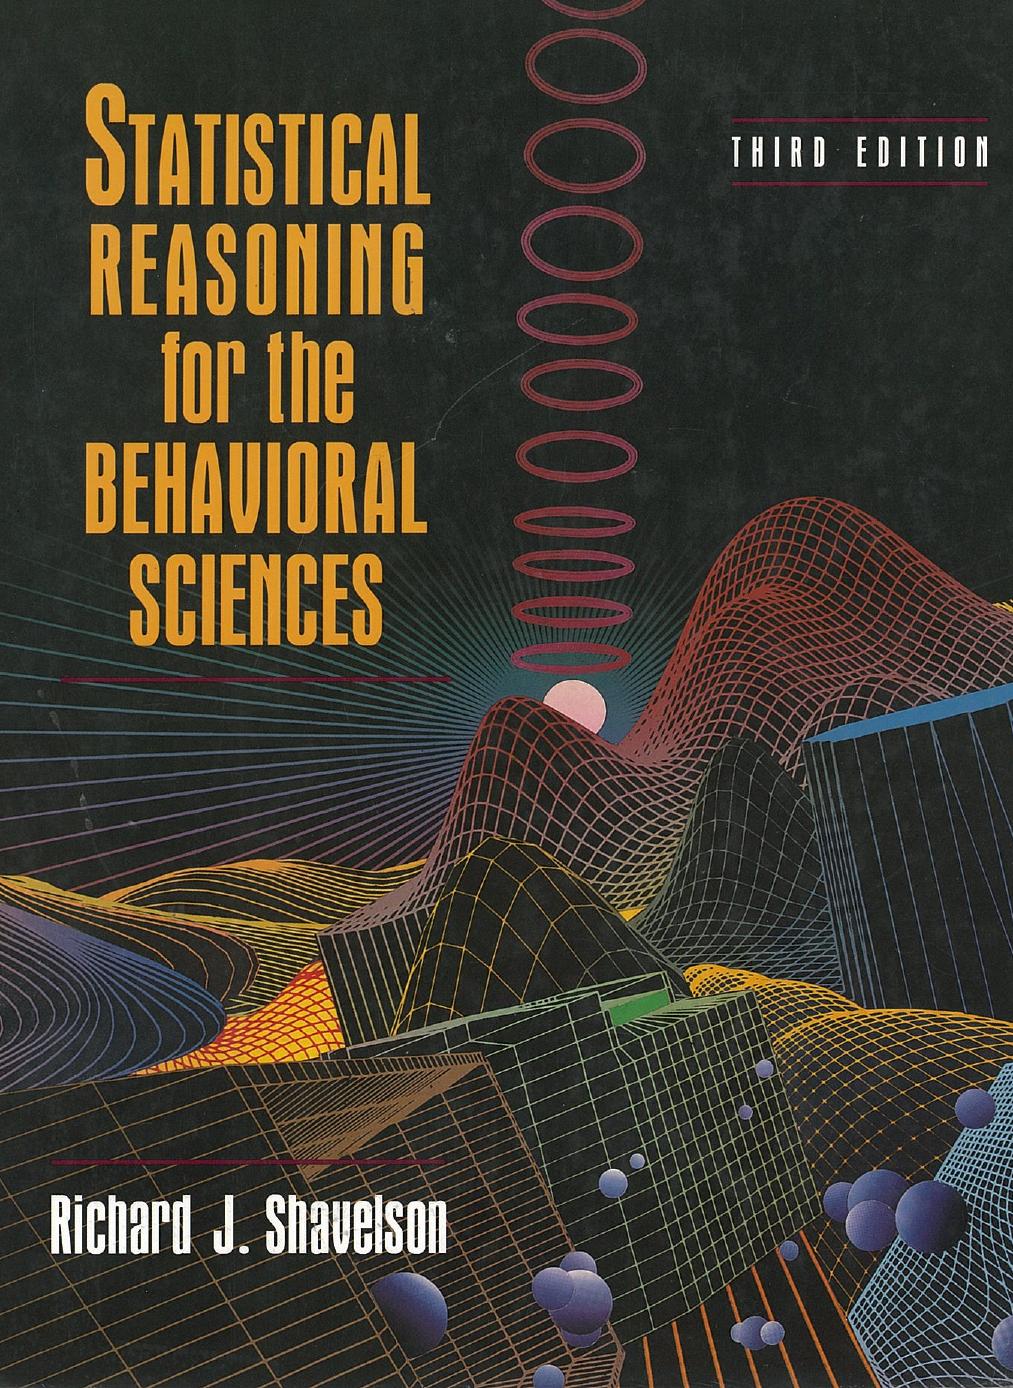 Statistical Reasoning for the Behavioral Sciences by Richard J. Shavelson